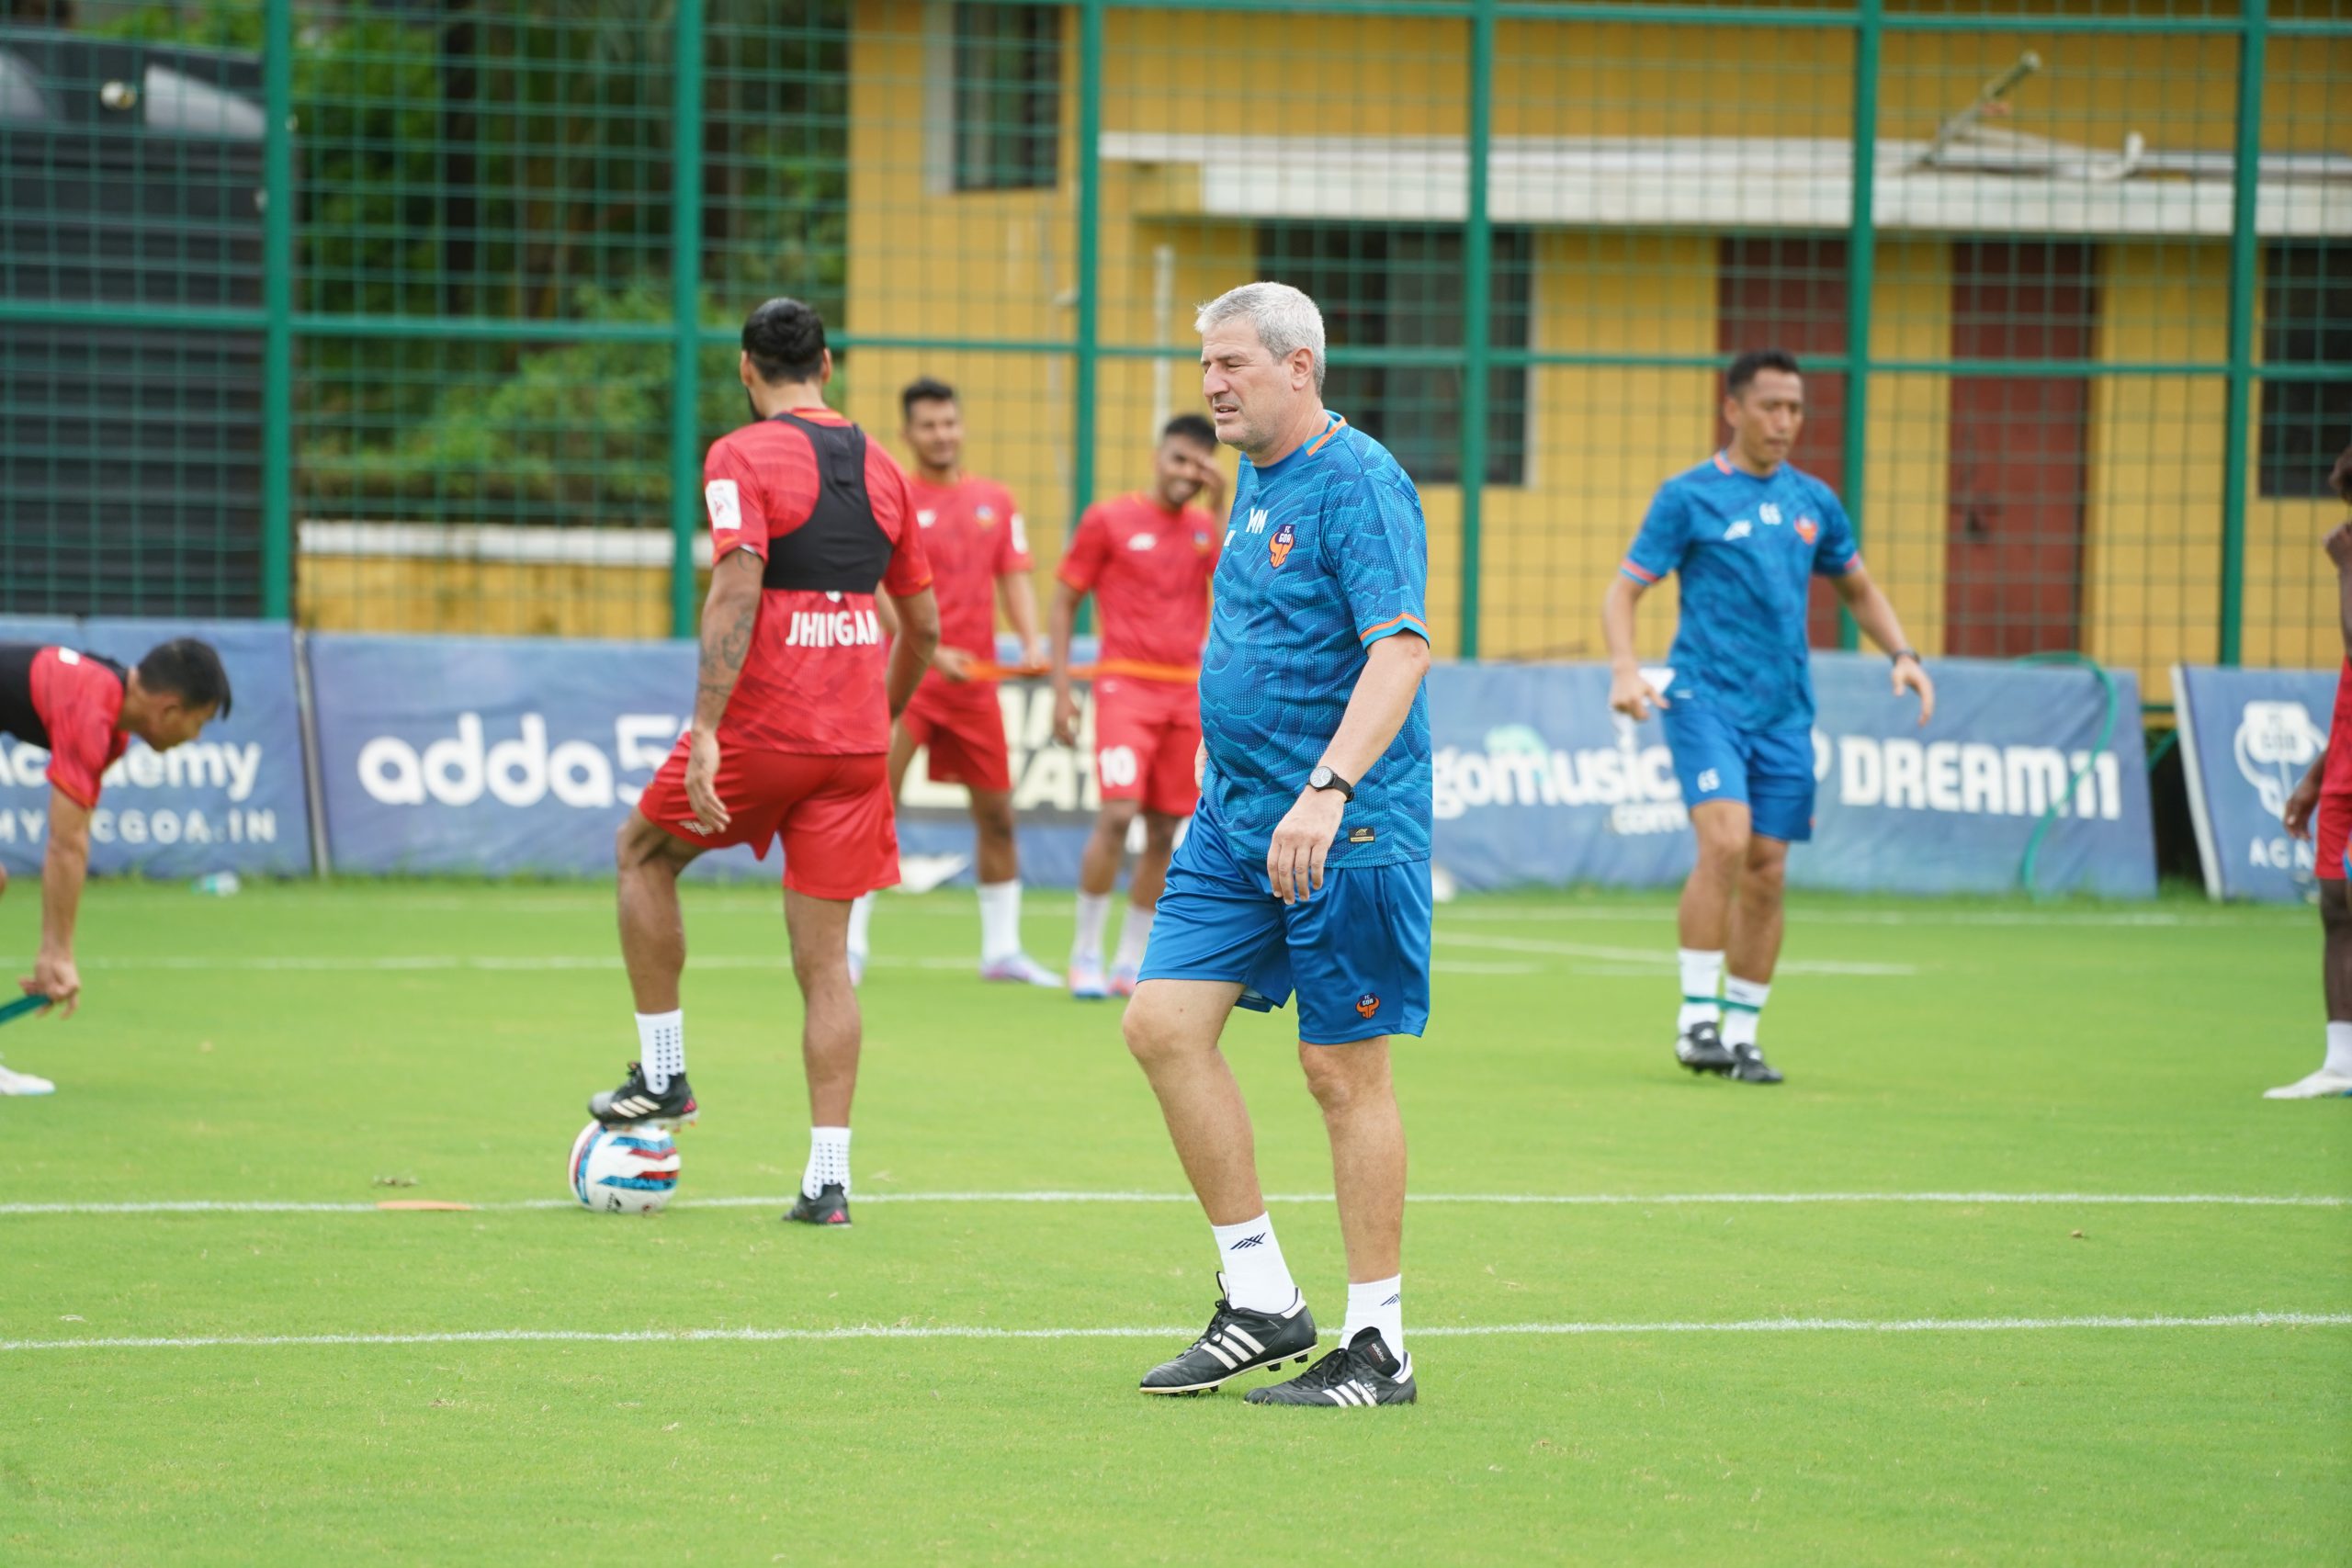 FC Goa coach Manolo Marquez supervising training ahead of their 132nd IndianOil Durand Cup clash against Mohun Bagan Super Giant in Kolkata.